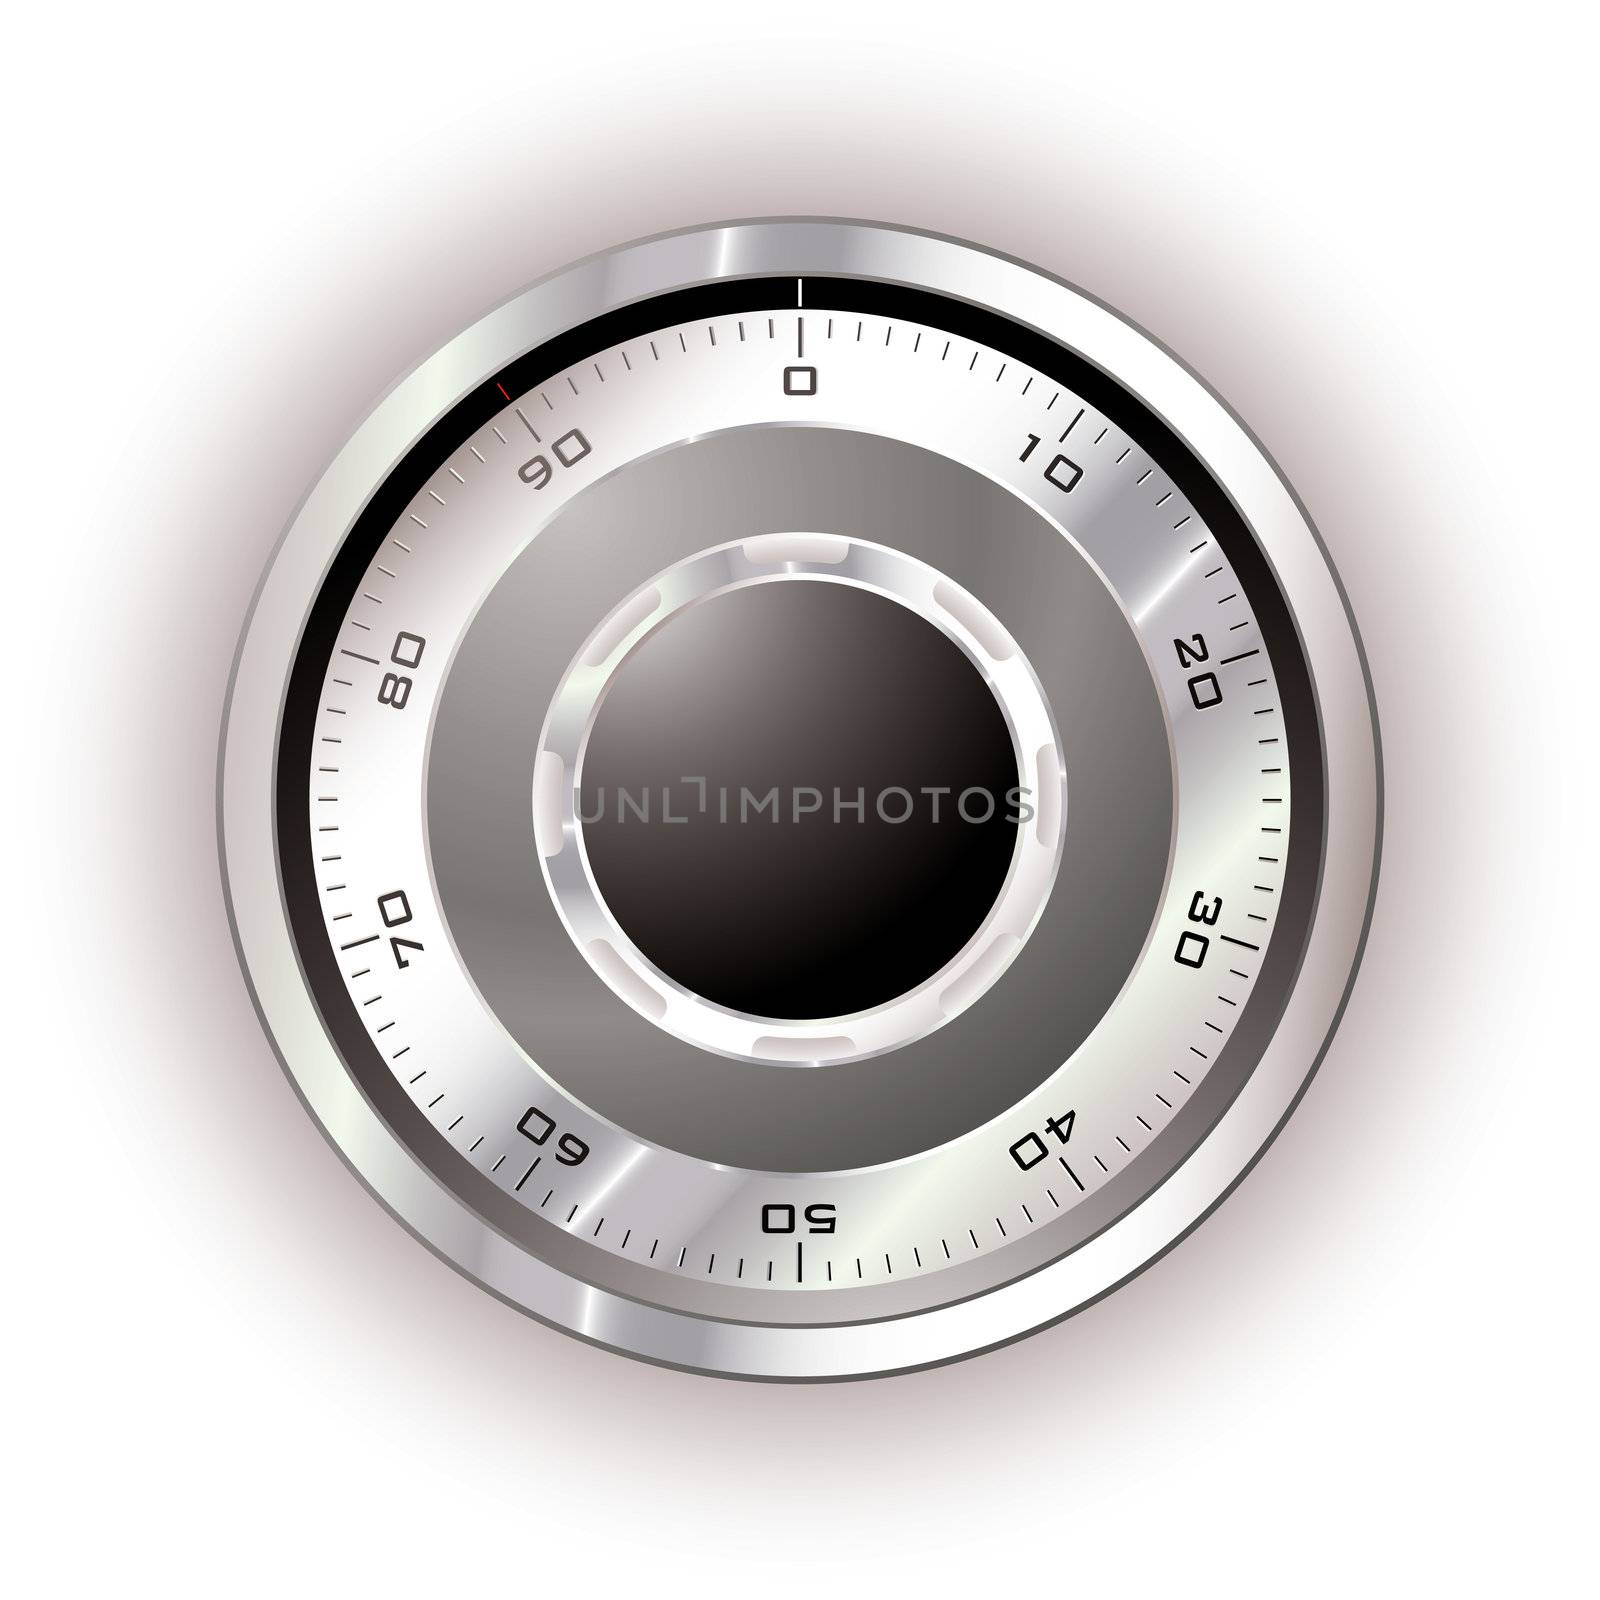 Silver safe dial with white background and light reflection